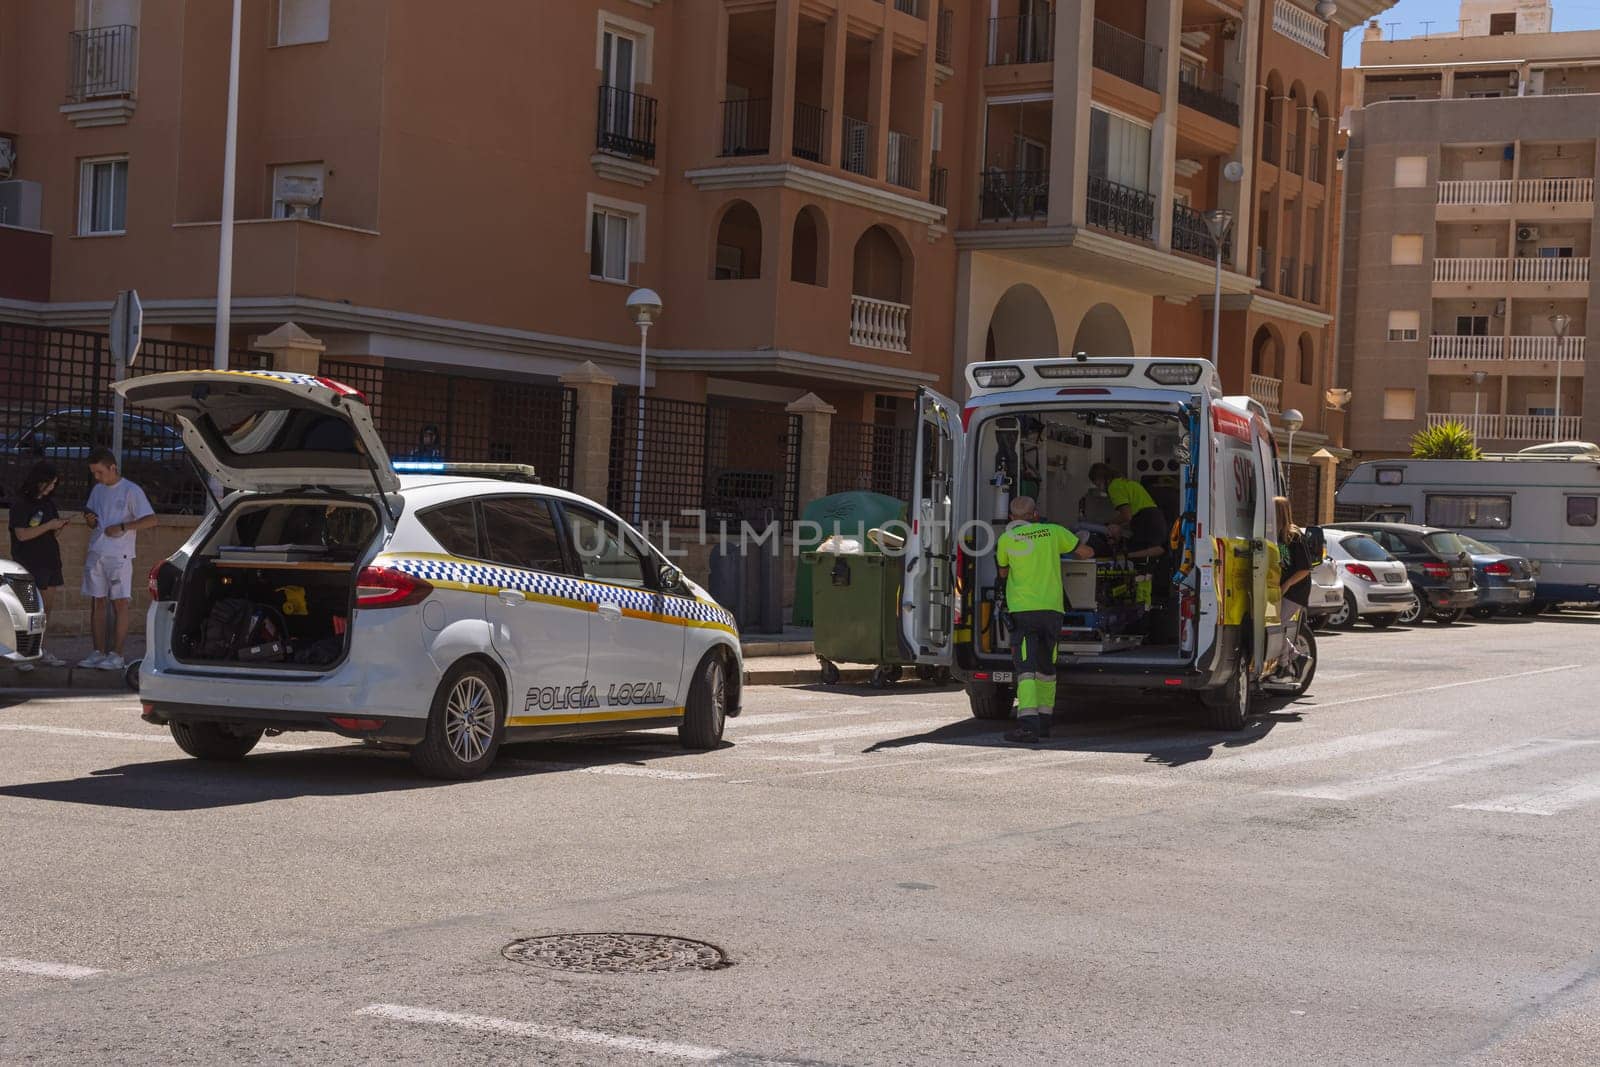 Spain, Torrevieja May 28, 2023, an ambulance on the road picks up a man who was hit by a car on the road, a resort town in Spain near the sea. High quality photo